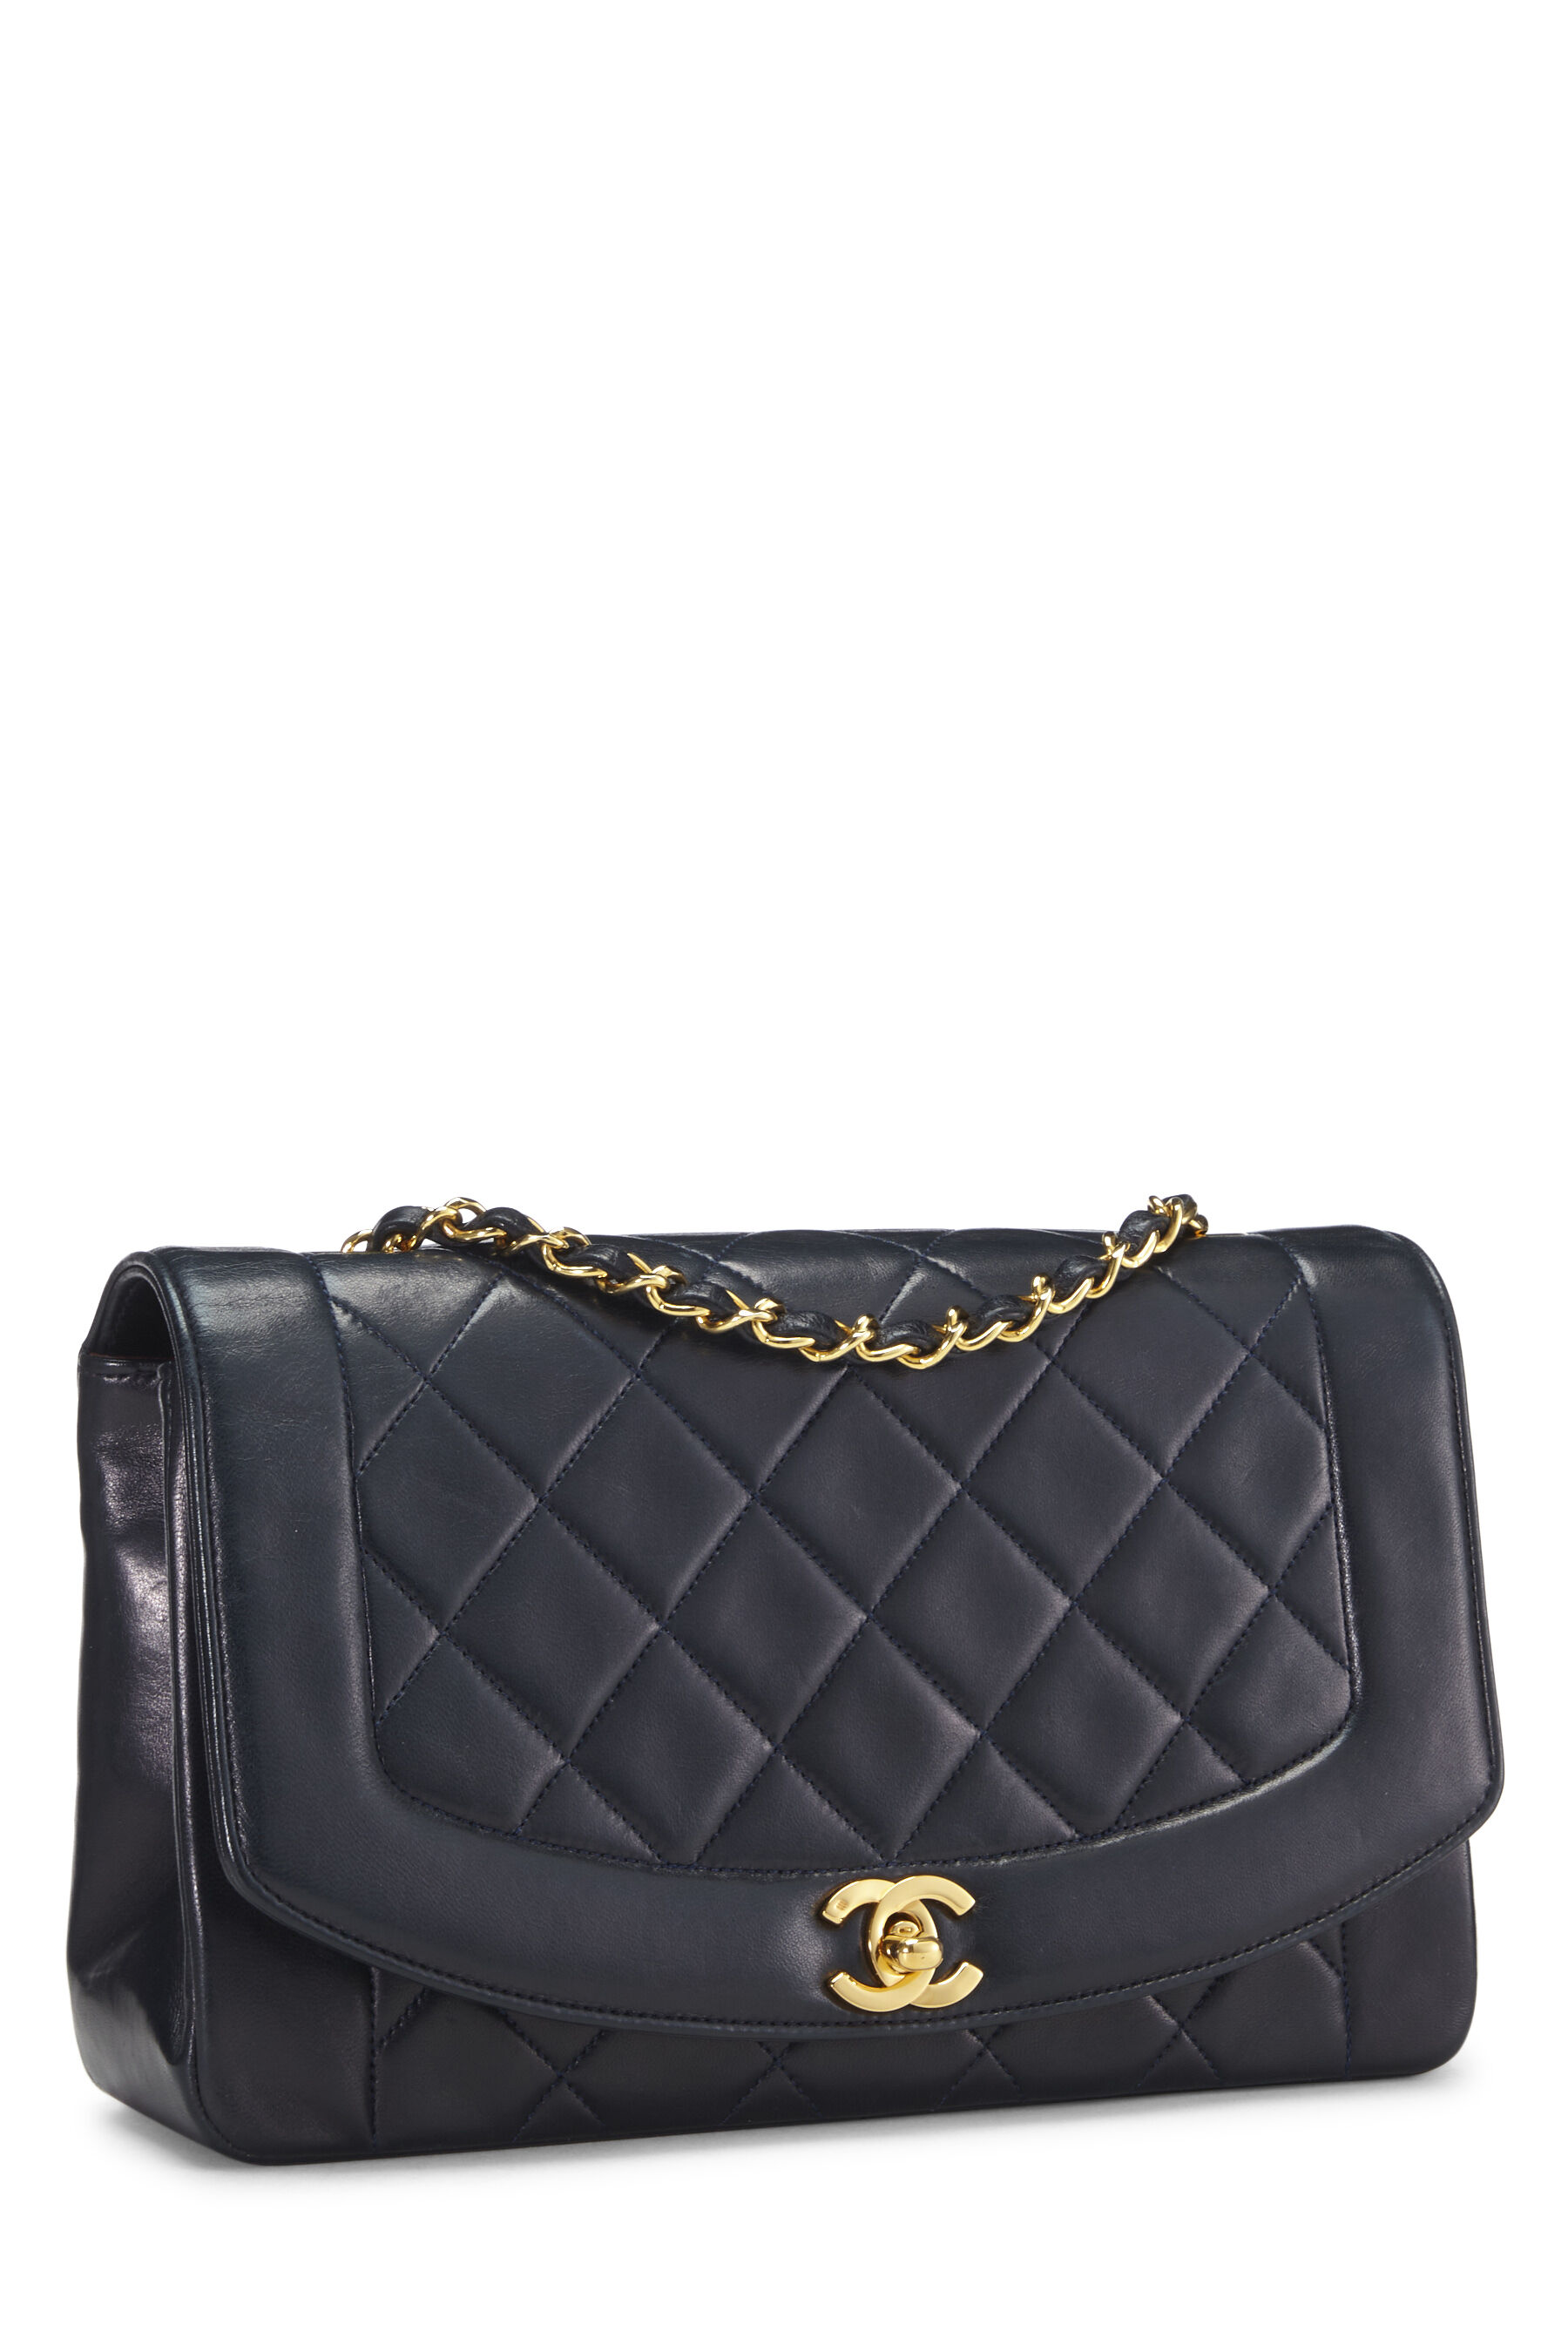 Chanel Vintage Diana Small Flap, Navy Blue Lambskin with Gold Hardware,  Preowned in Dustbag WA001